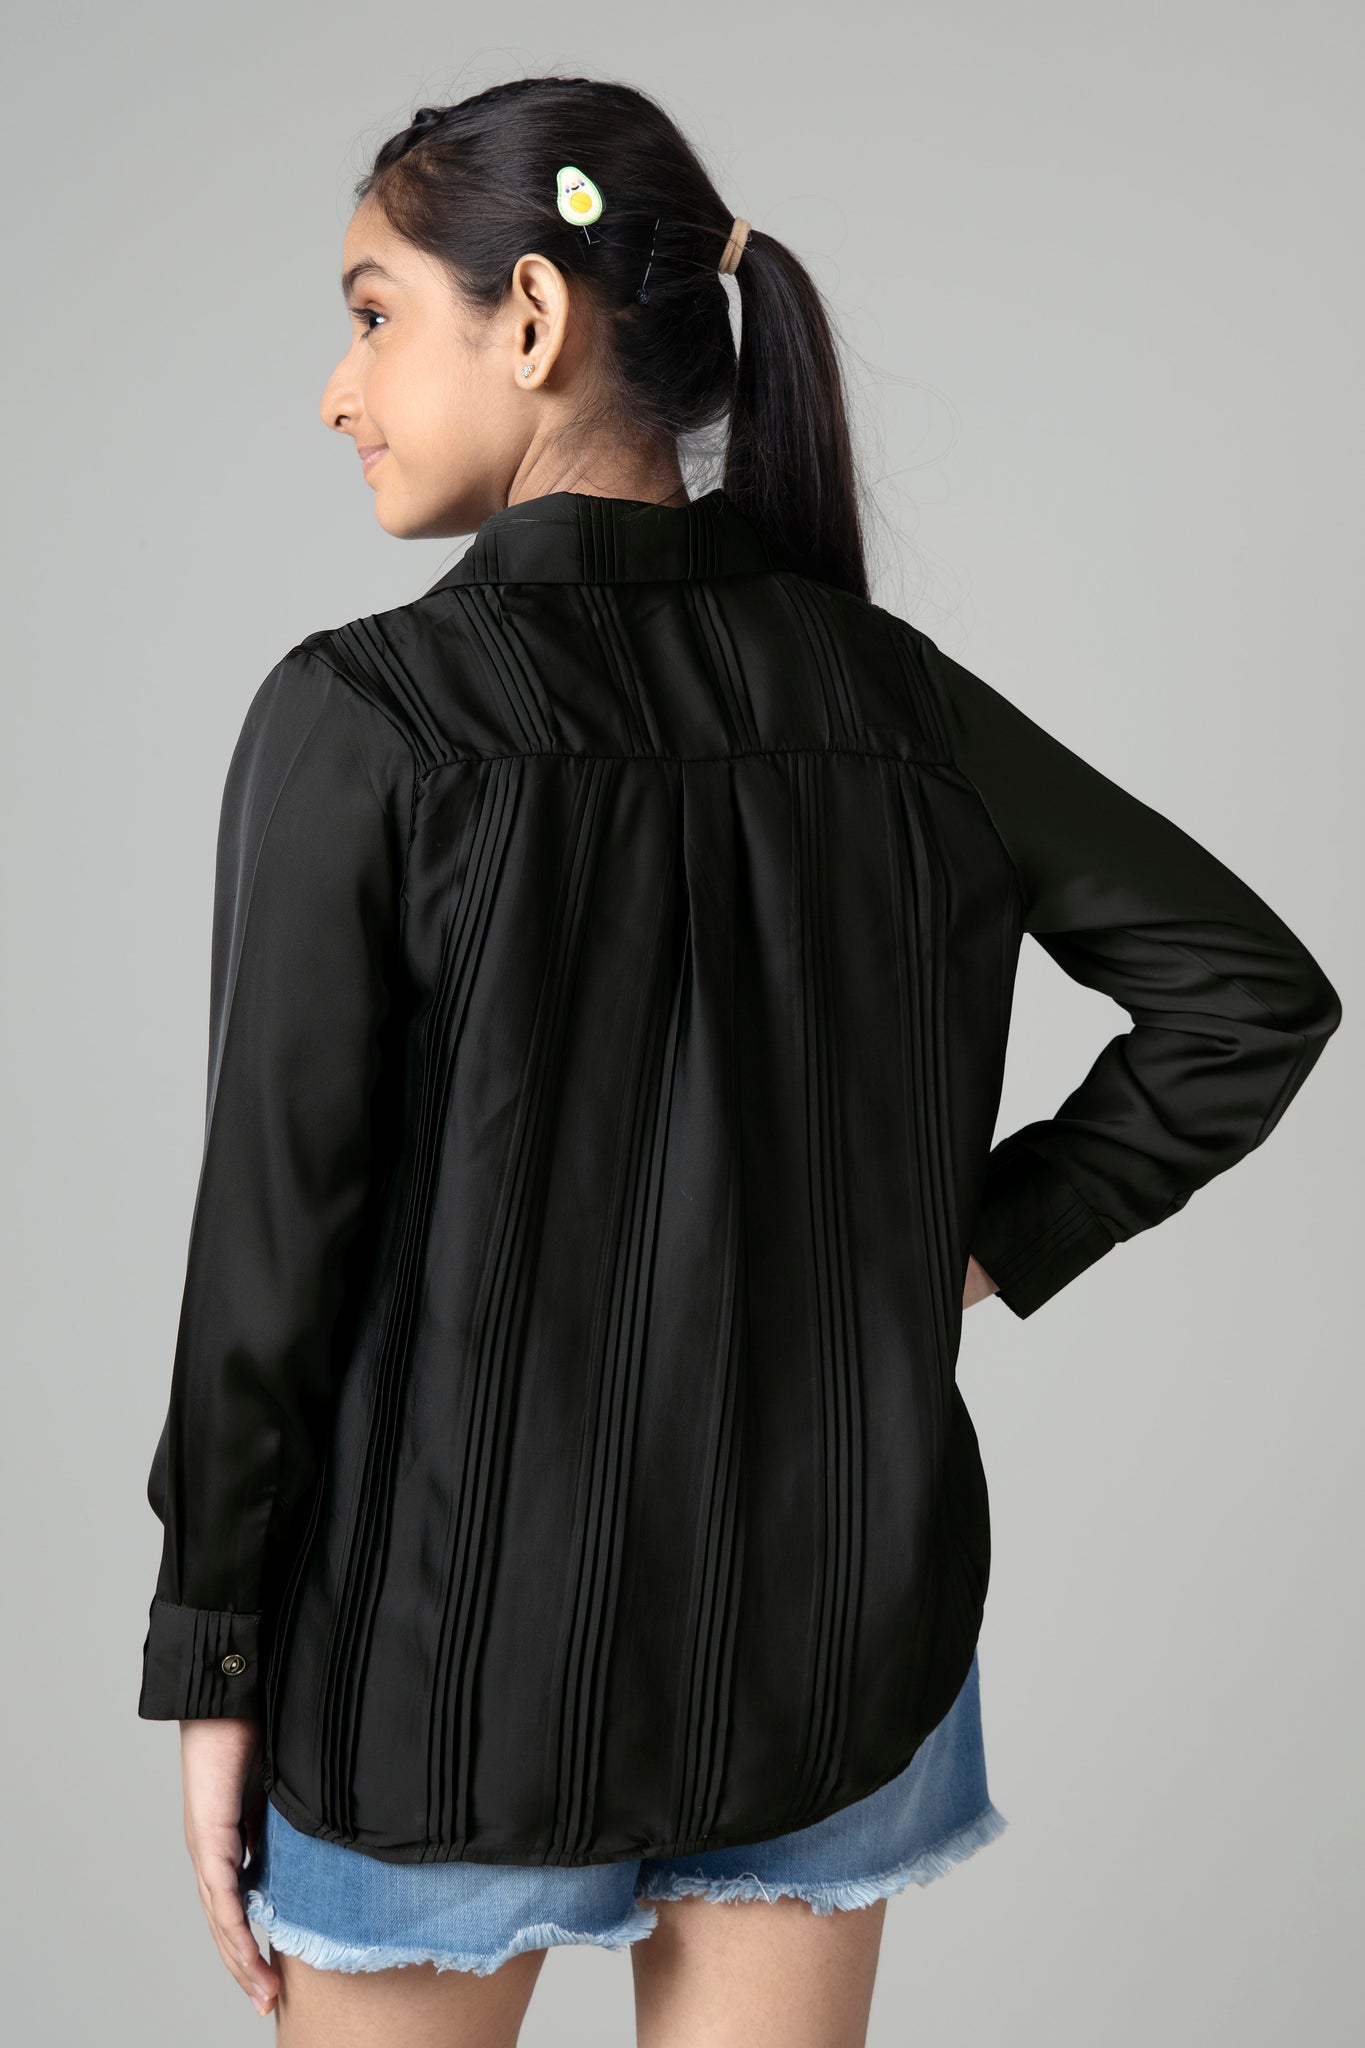 Exclusive Black Half Pleated Shirt For Girls